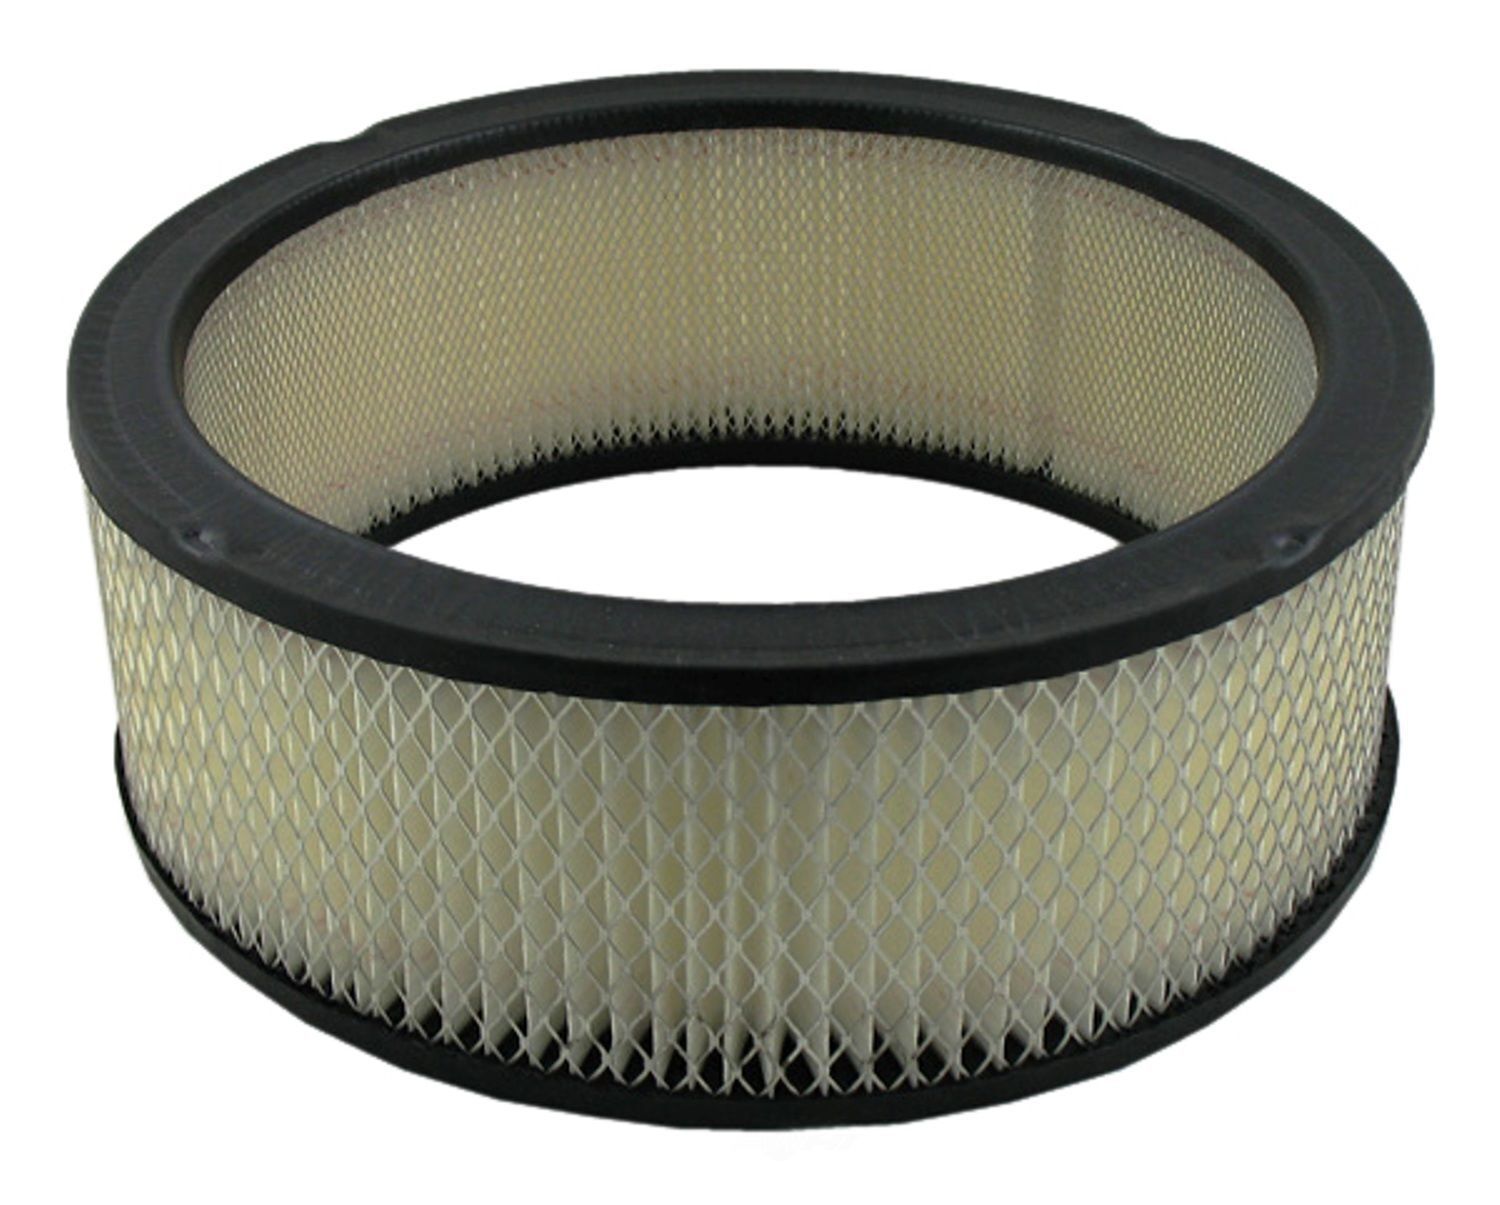 Air Filter for Chevrolet G20 1975-1995 with 5.7L 8cyl Engine